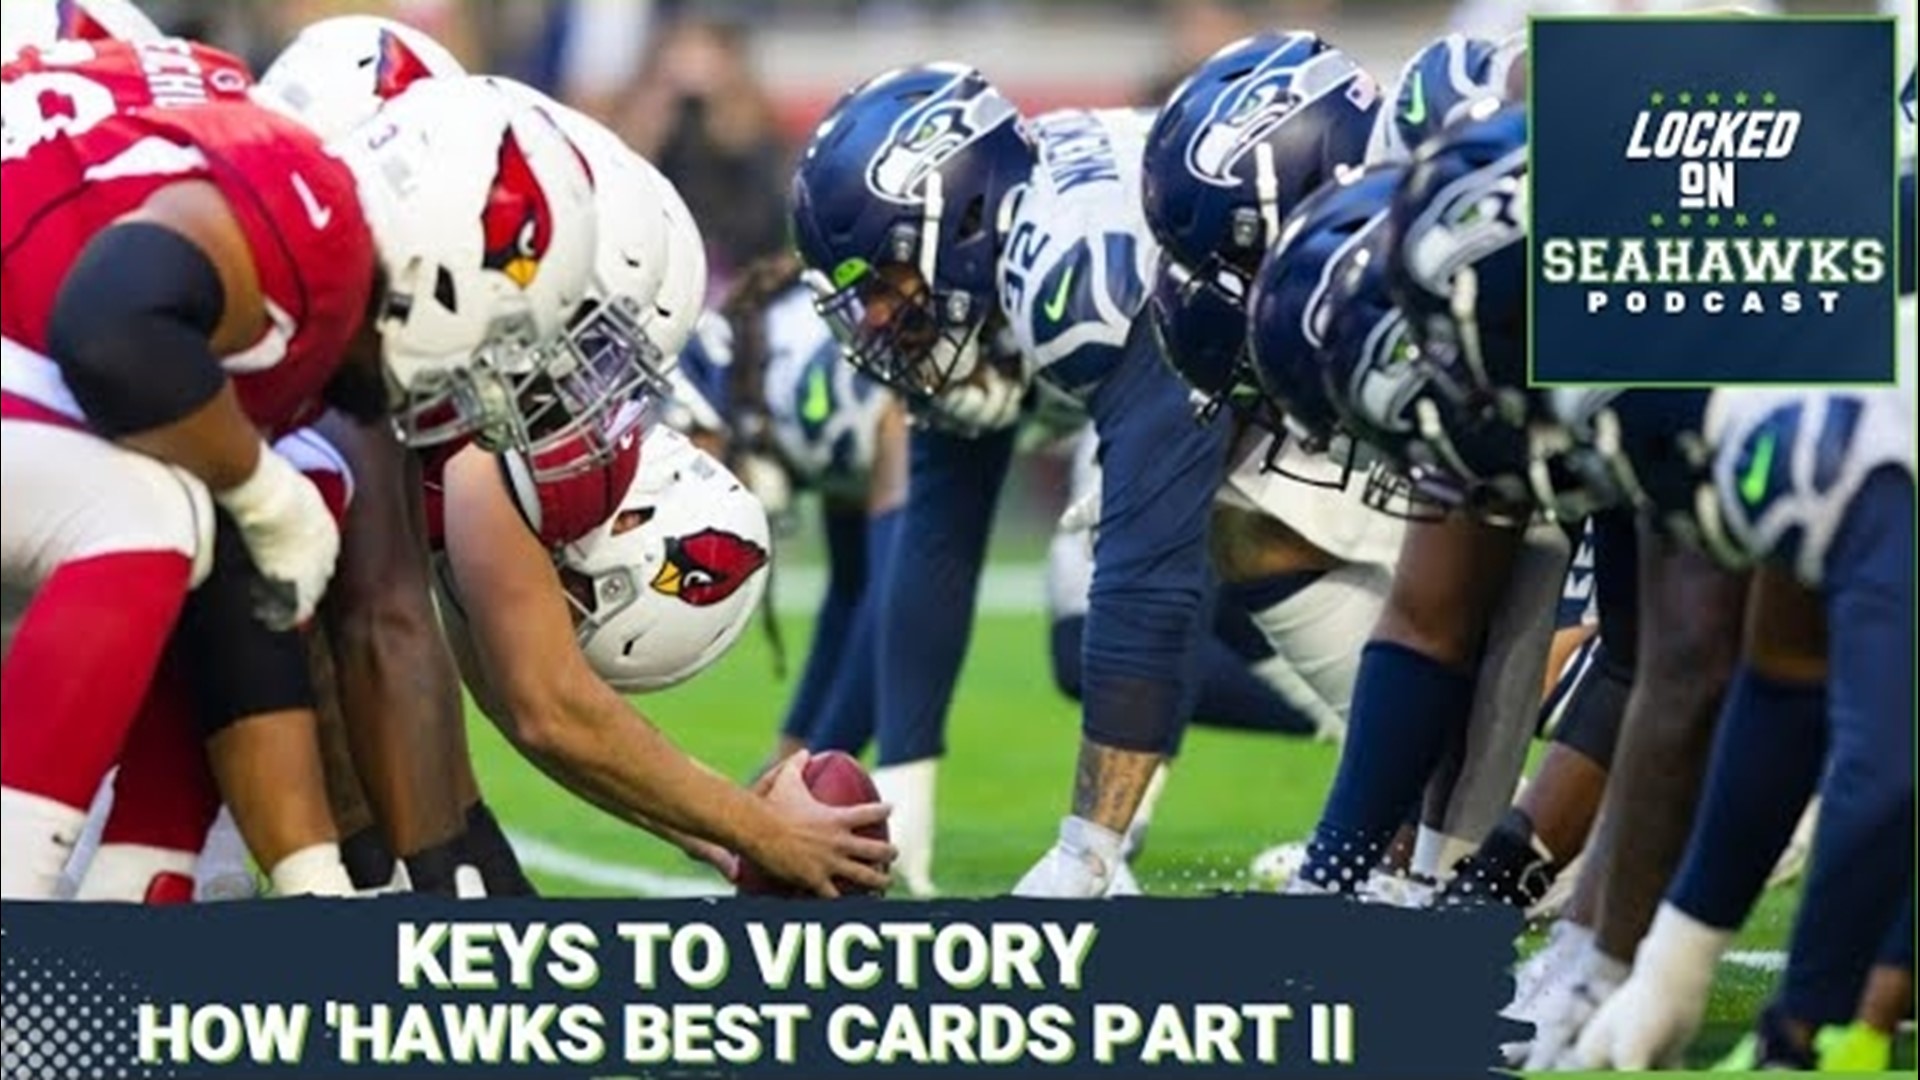 Cardinals roll past the injury-depleted Seahawks, 27-13